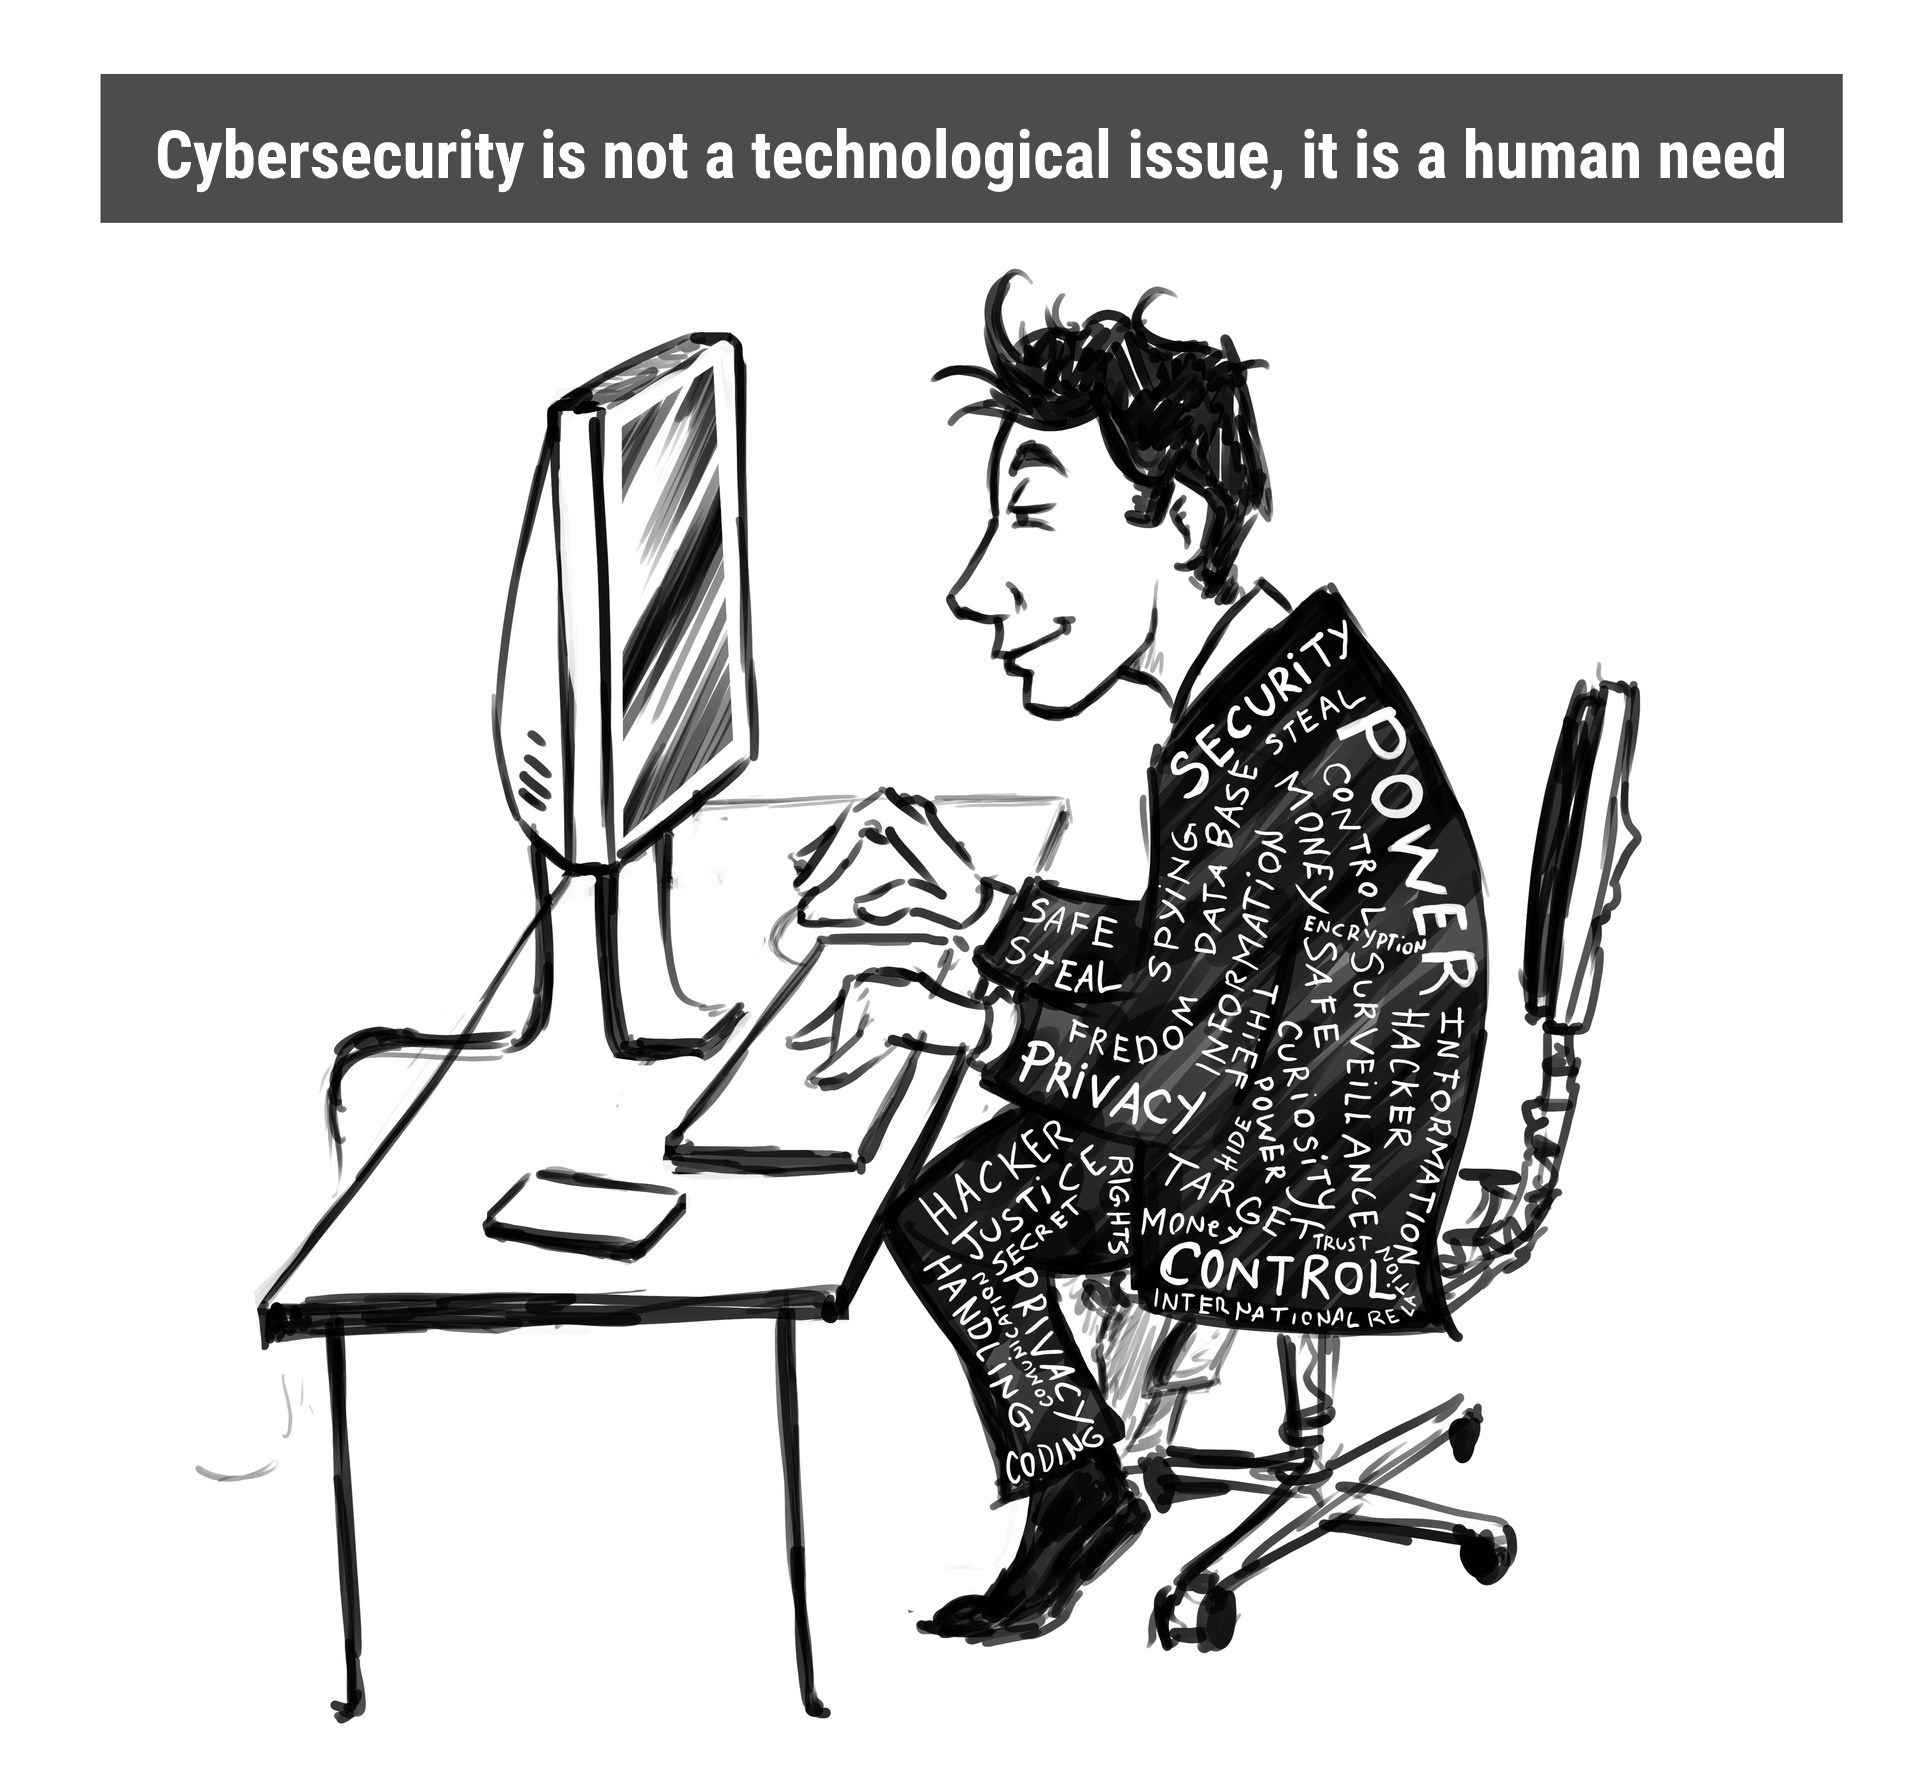 Image credited to Abrahama Tansini and created for the OpenIDEO Cybersecurity Visuals contest